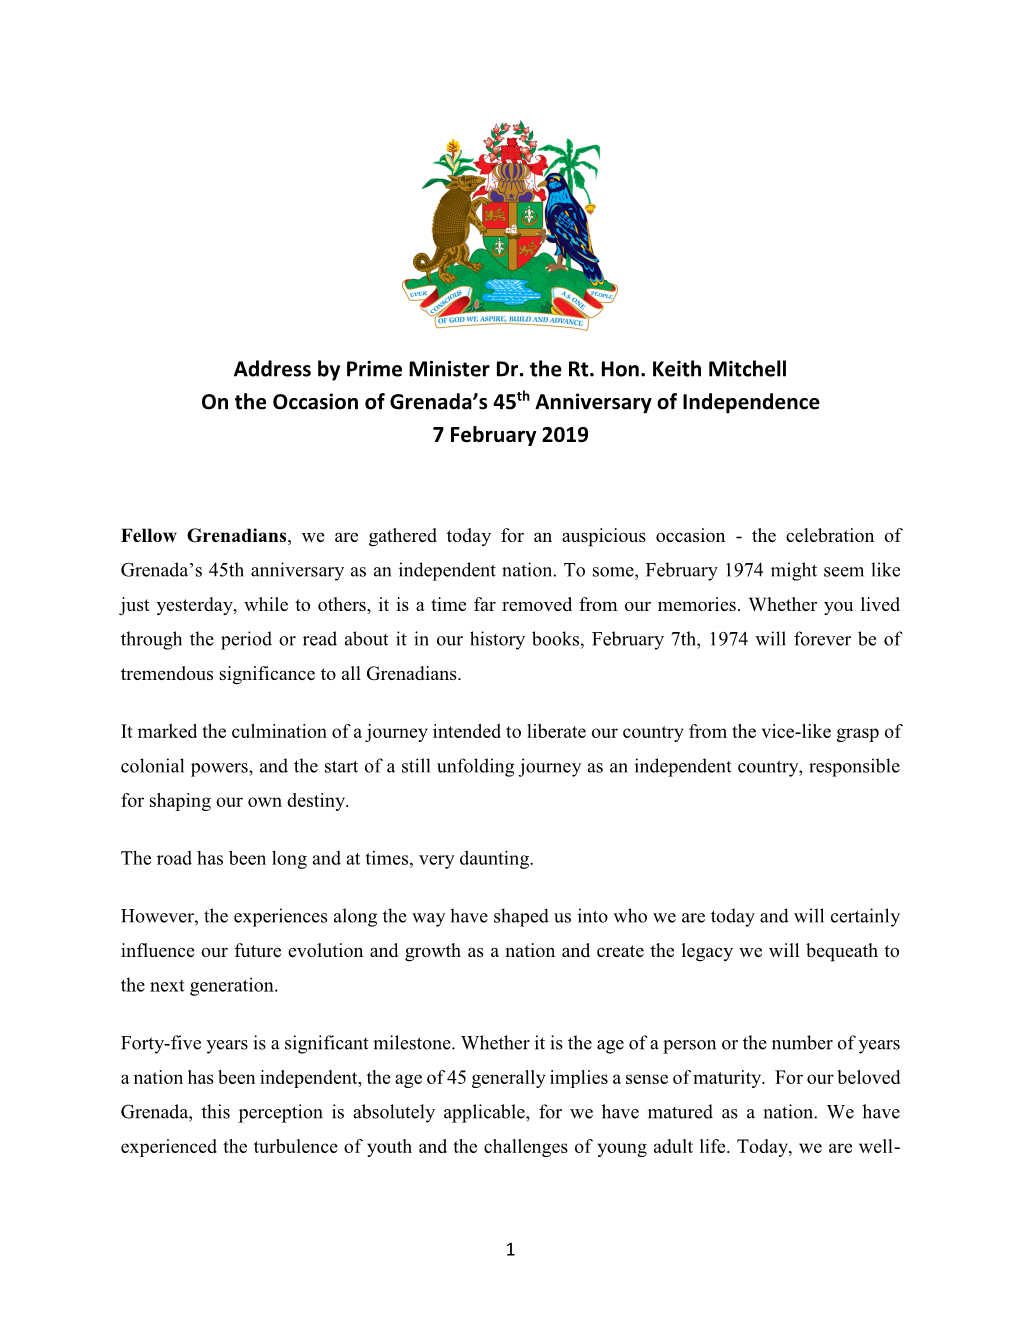 Address by Prime Minister Dr. the Rt. Hon. Keith Mitchell on the Occasion of Grenada’S 45Th Anniversary of Independence 7 February 2019